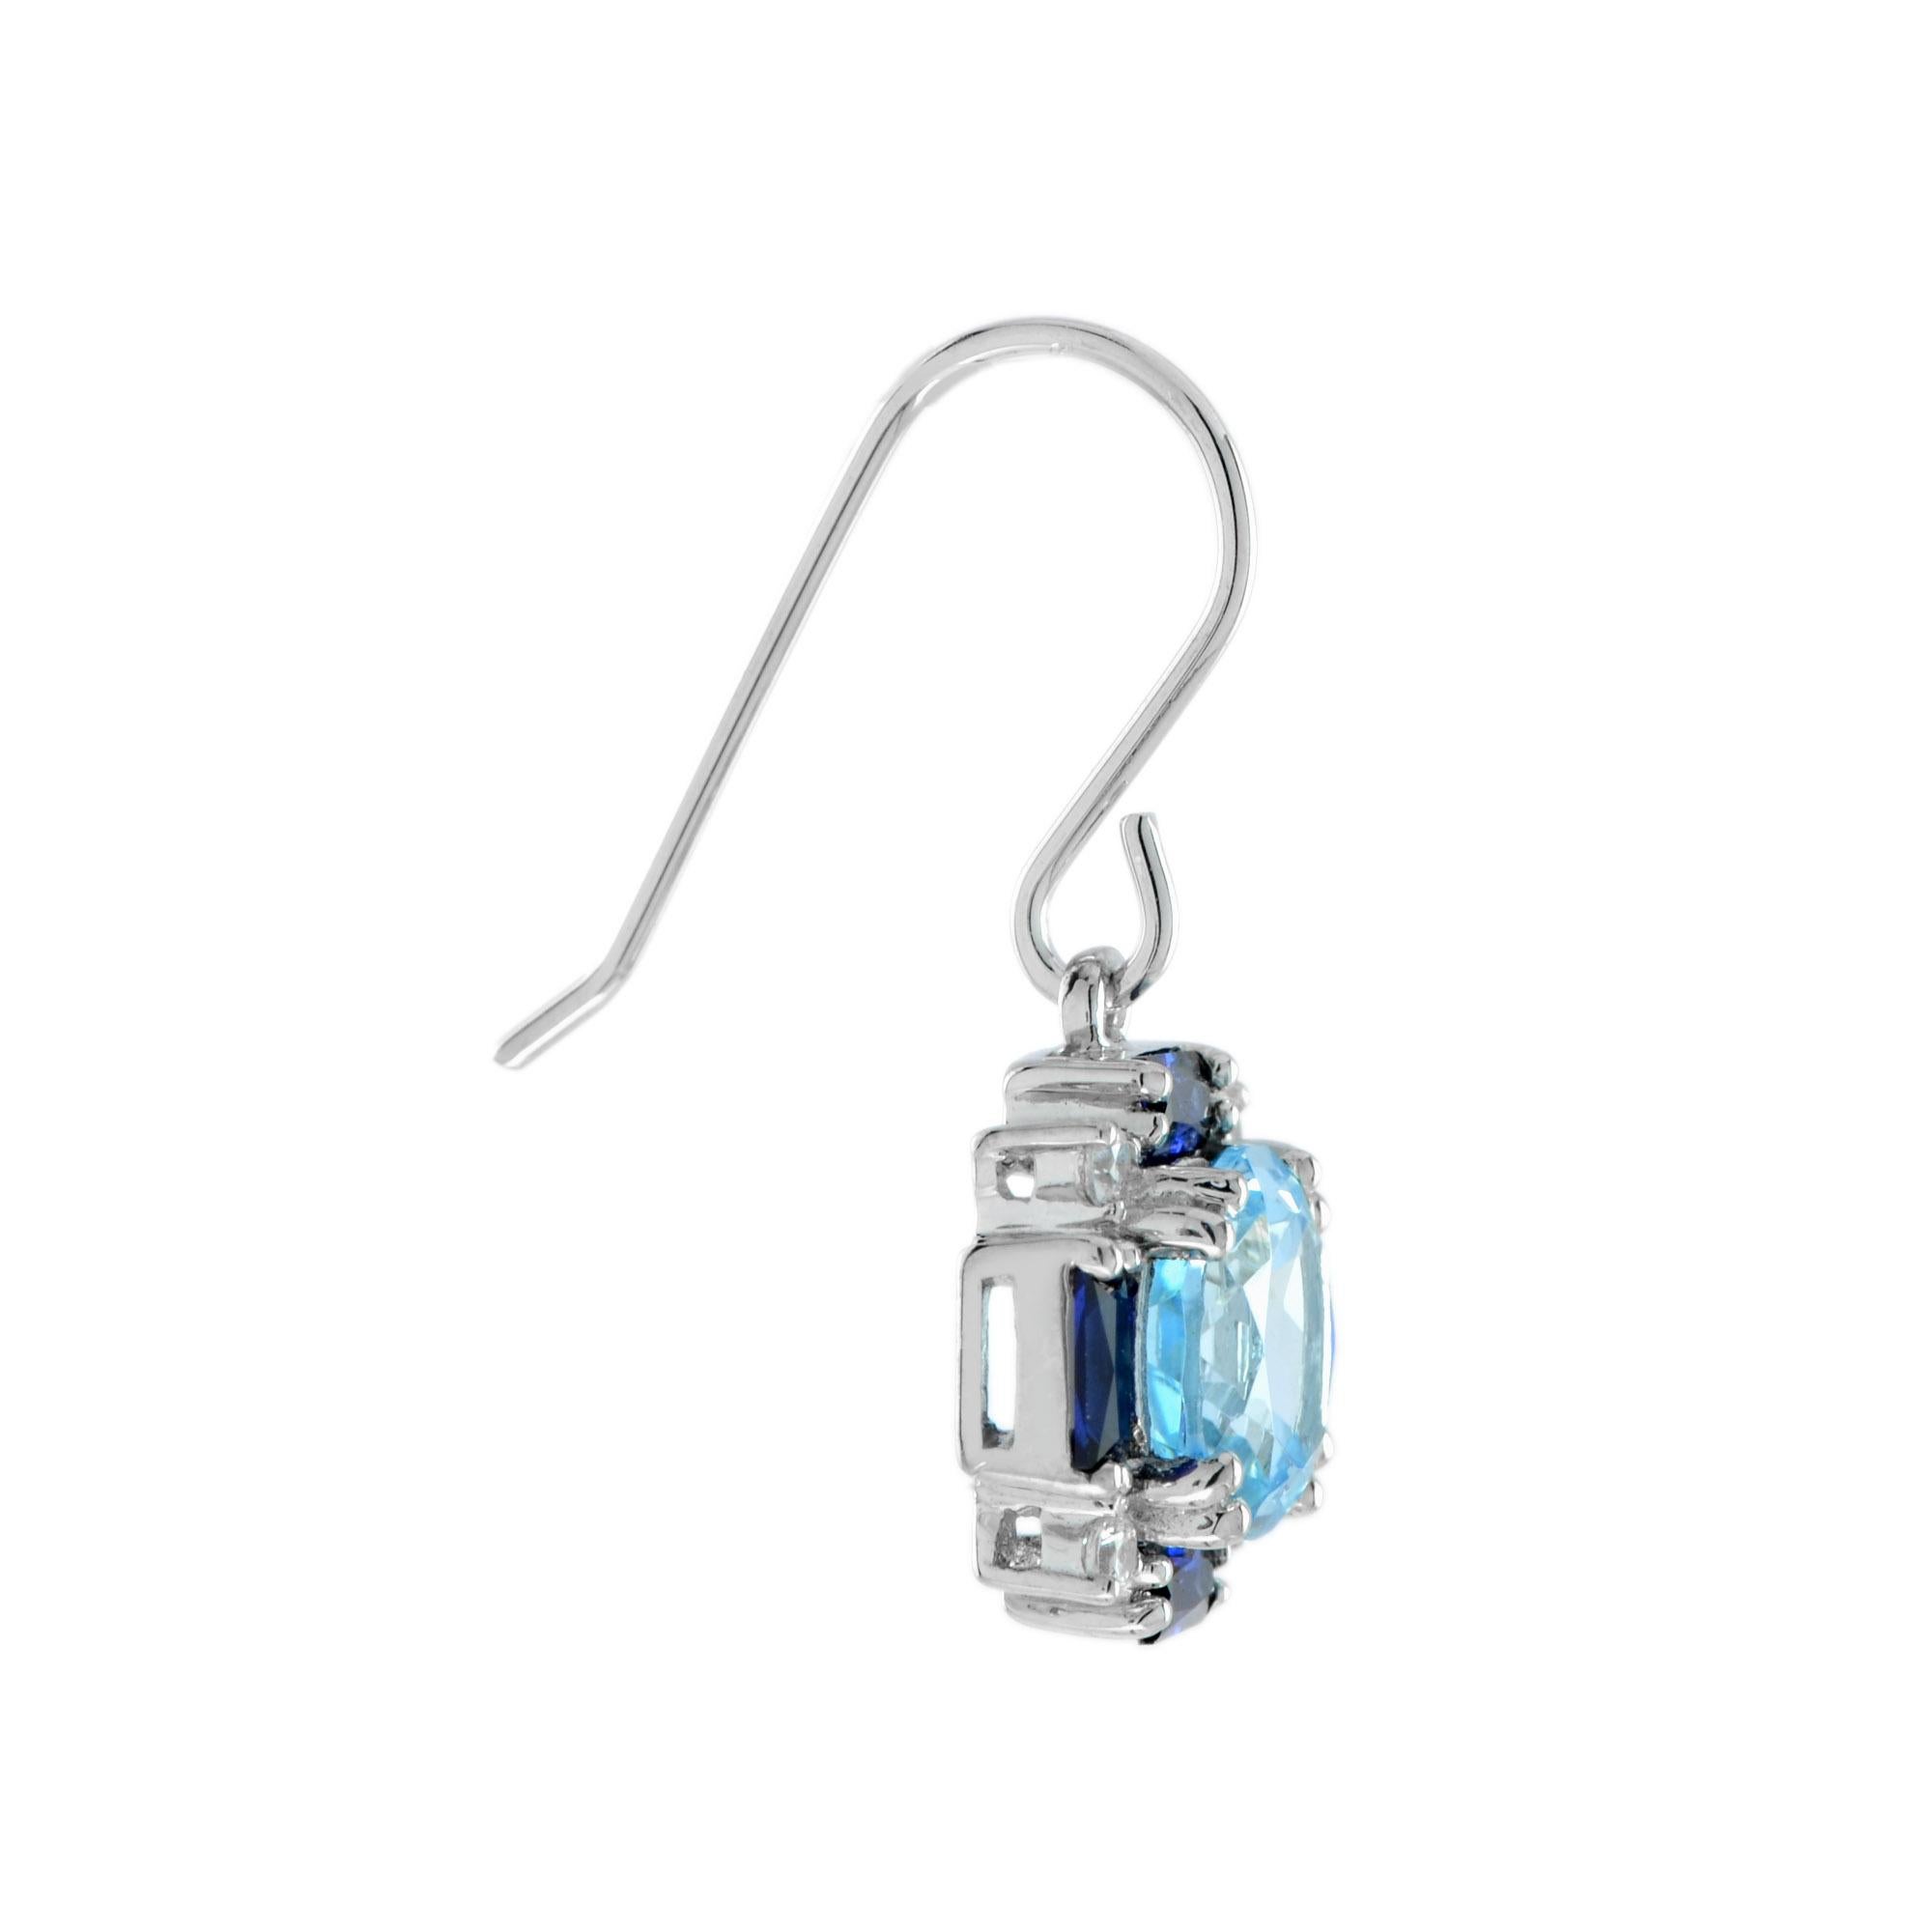 Exquisitely round cut blue topaz are handset into 14k white gold, bordered by blue baguette cut sapphires and round diamonds. A lovely pair to add colors to your day.

Earrings Information
Metal: 14K White Gold
Width: 12 mm.
Length: 26 mm.
Weight: